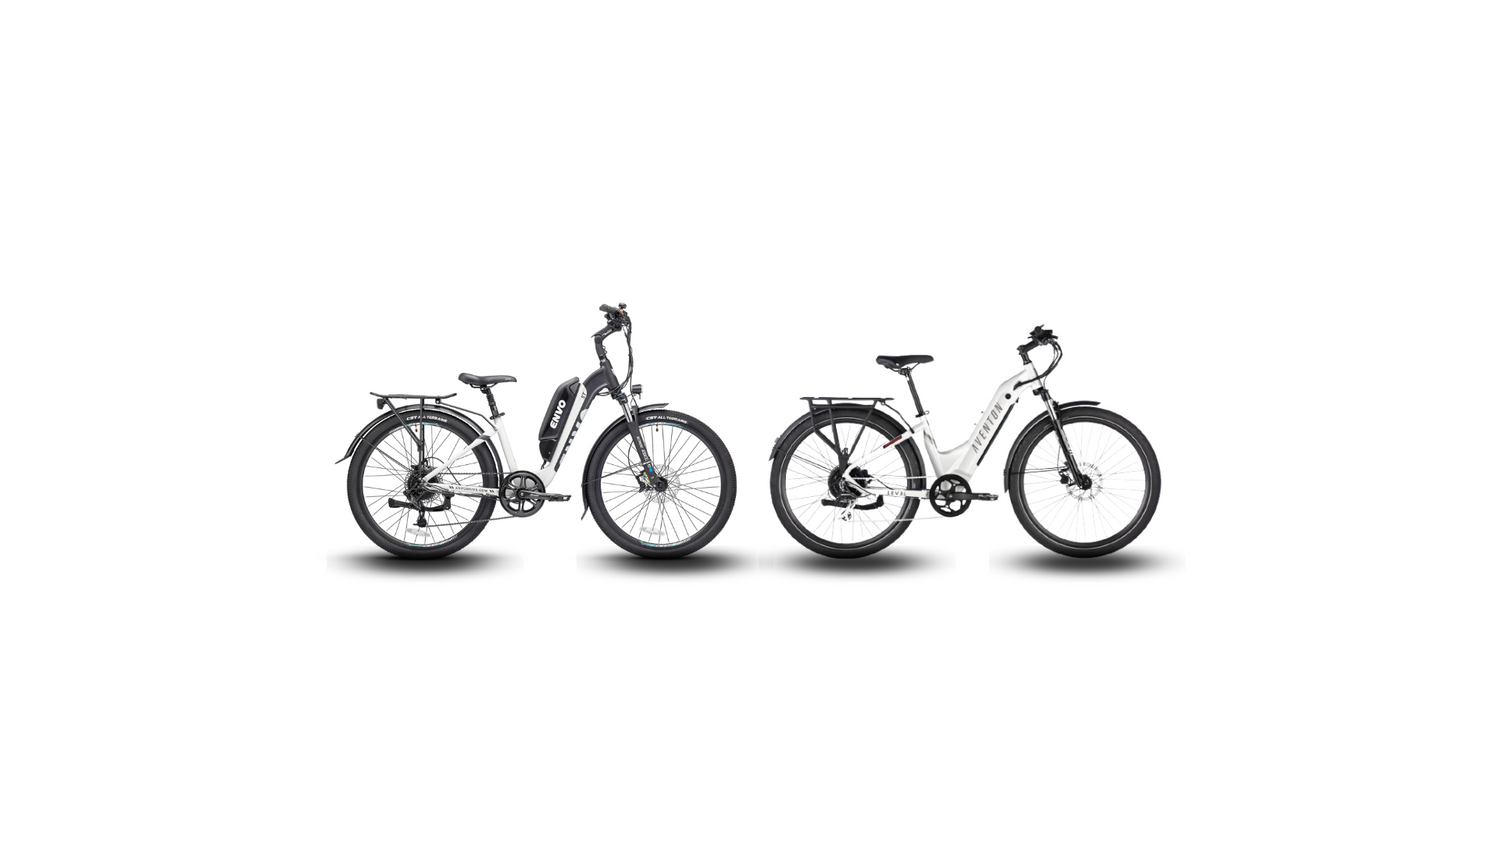 Comparing best-selling e-bikes: a full review of ENVO ST and Aventon Level 2